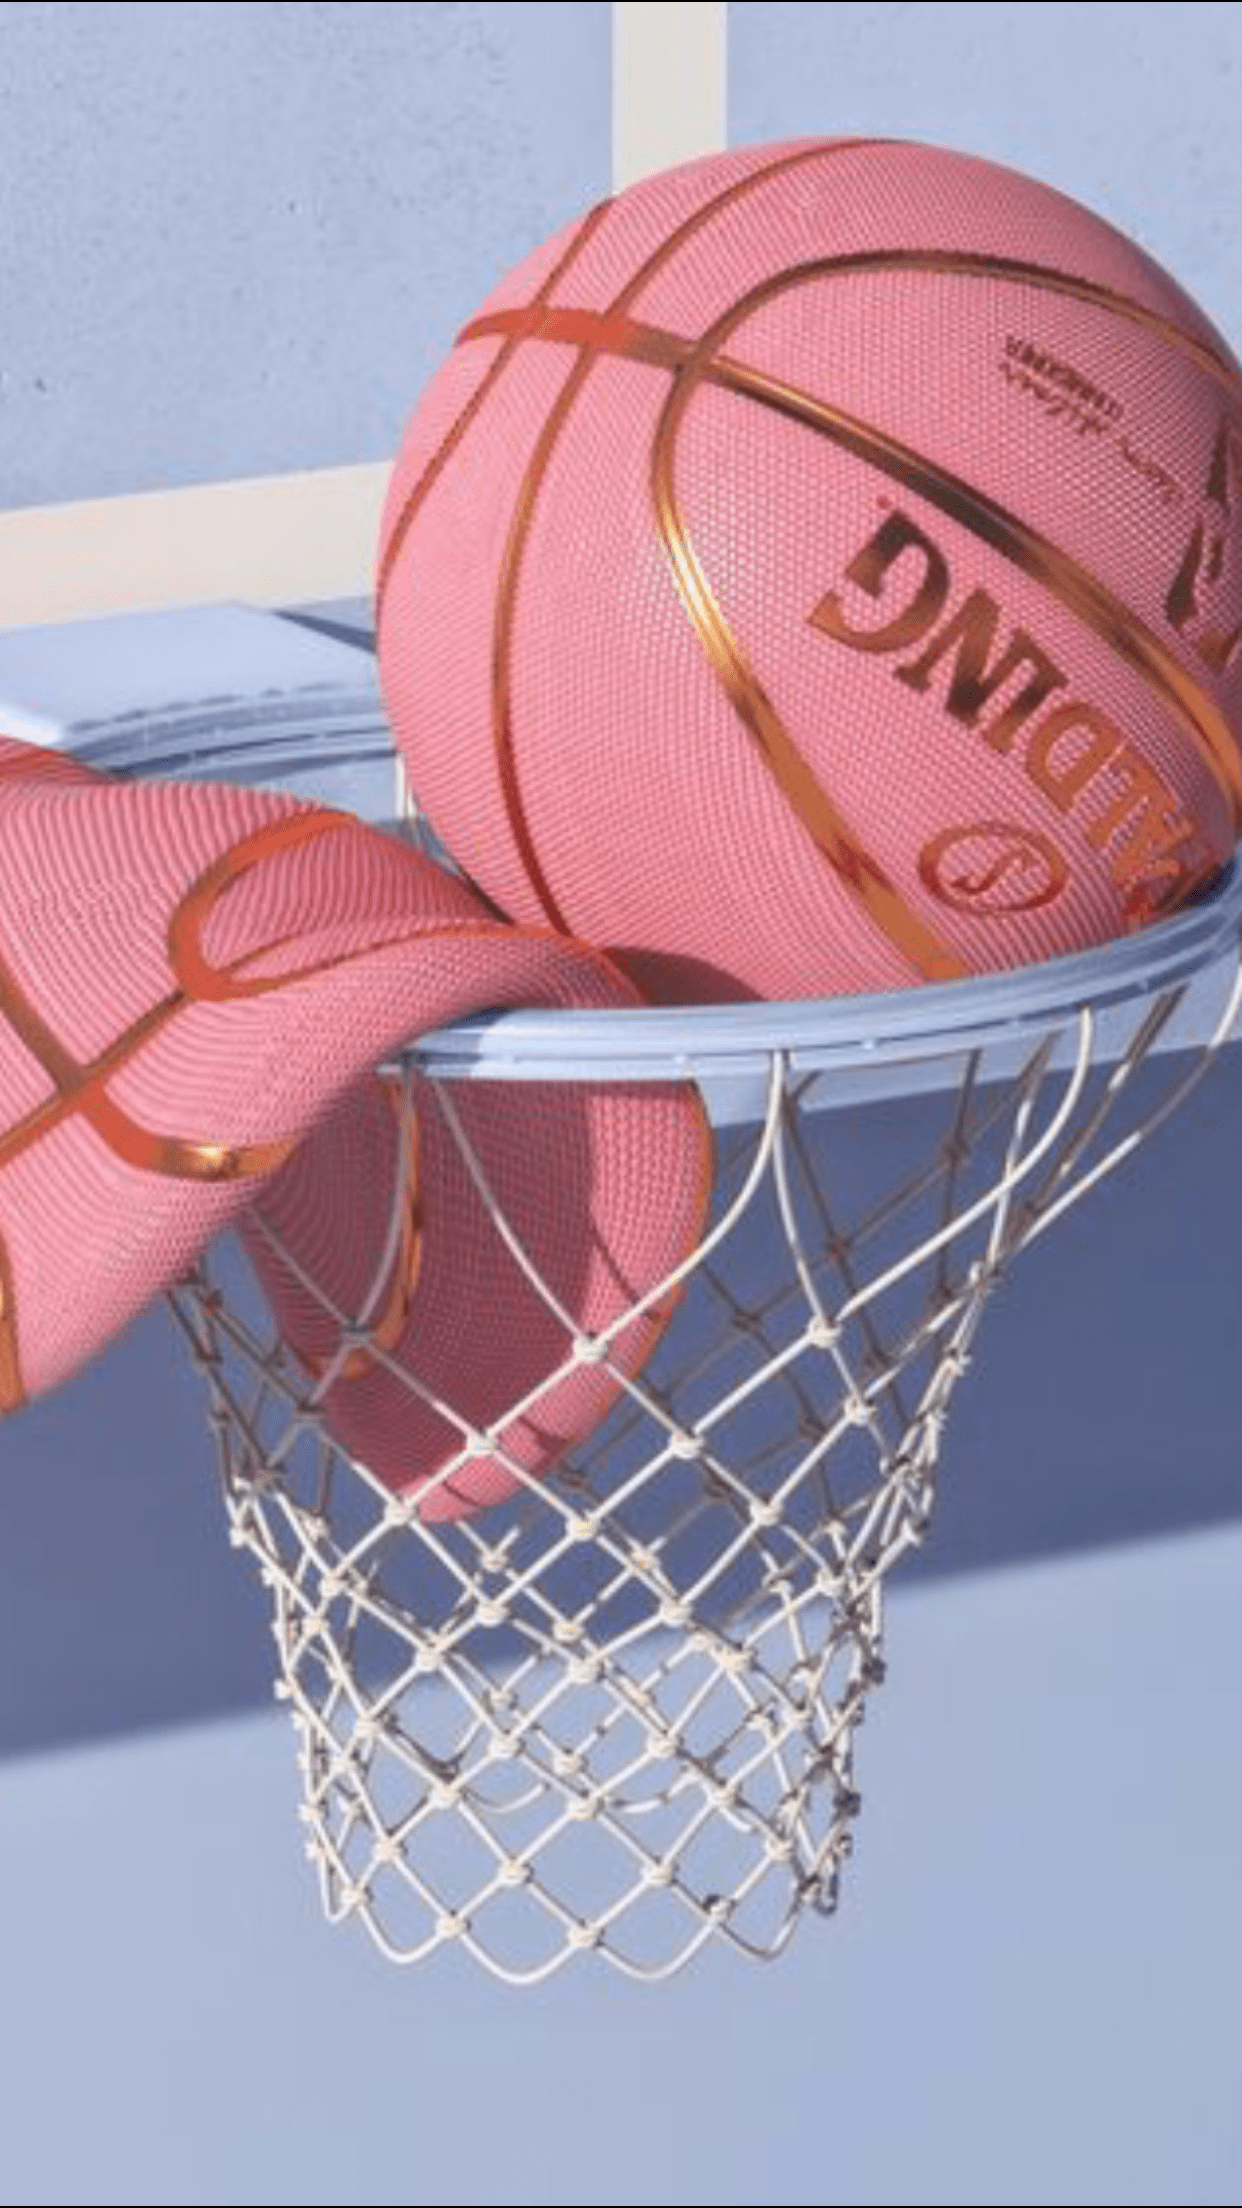 A pink basketball is sitting in the basket - Basketball